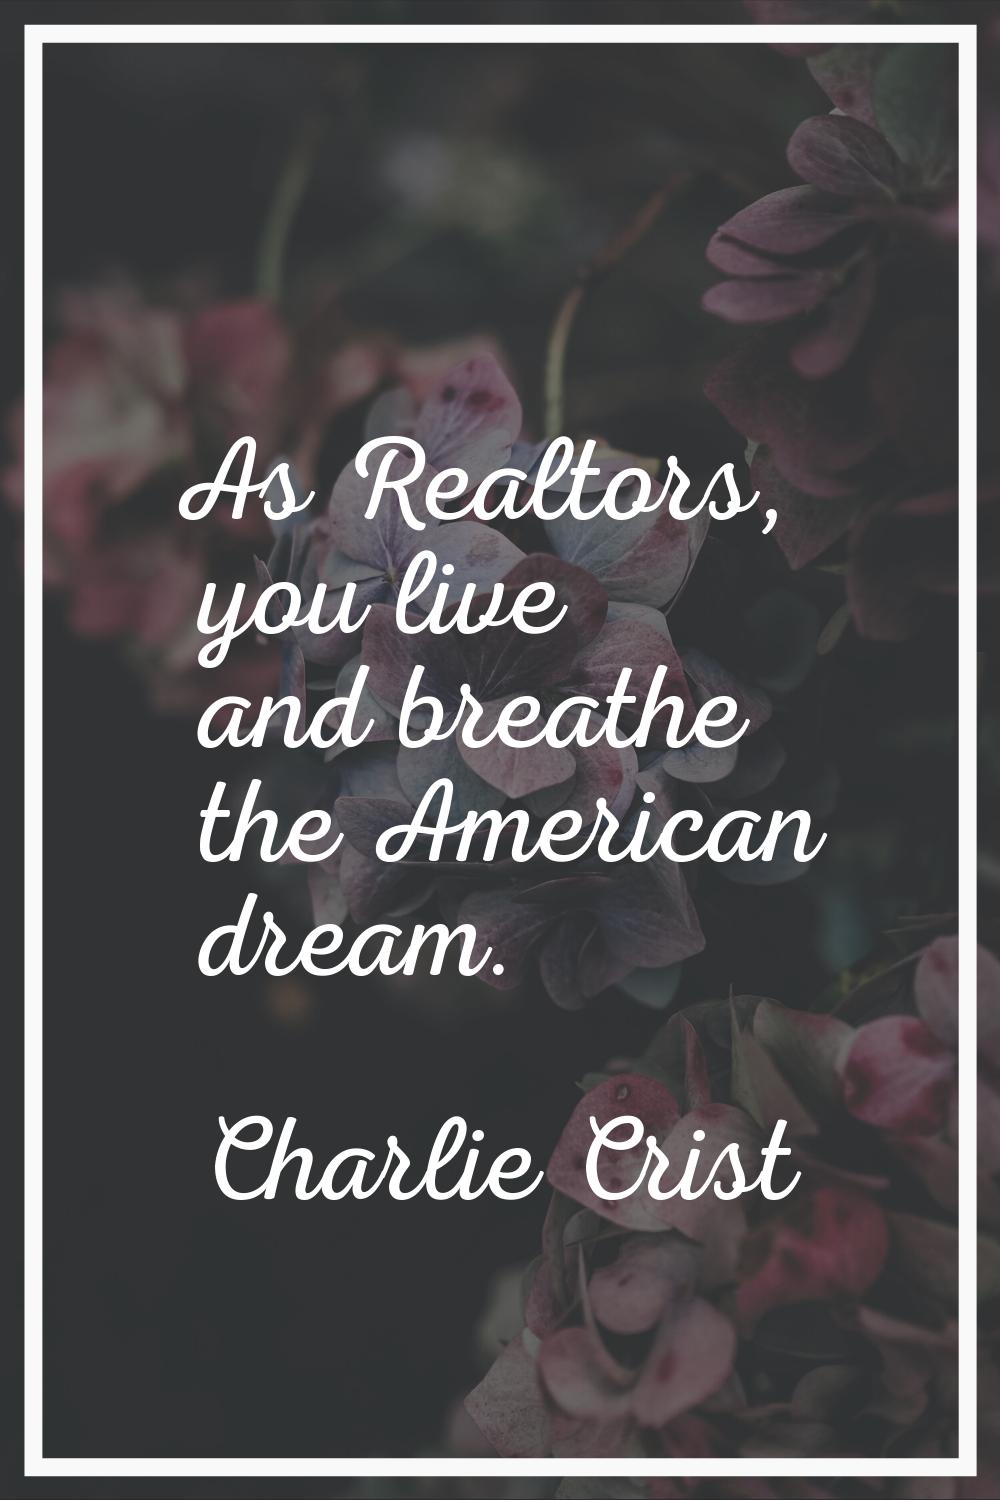 As Realtors, you live and breathe the American dream.